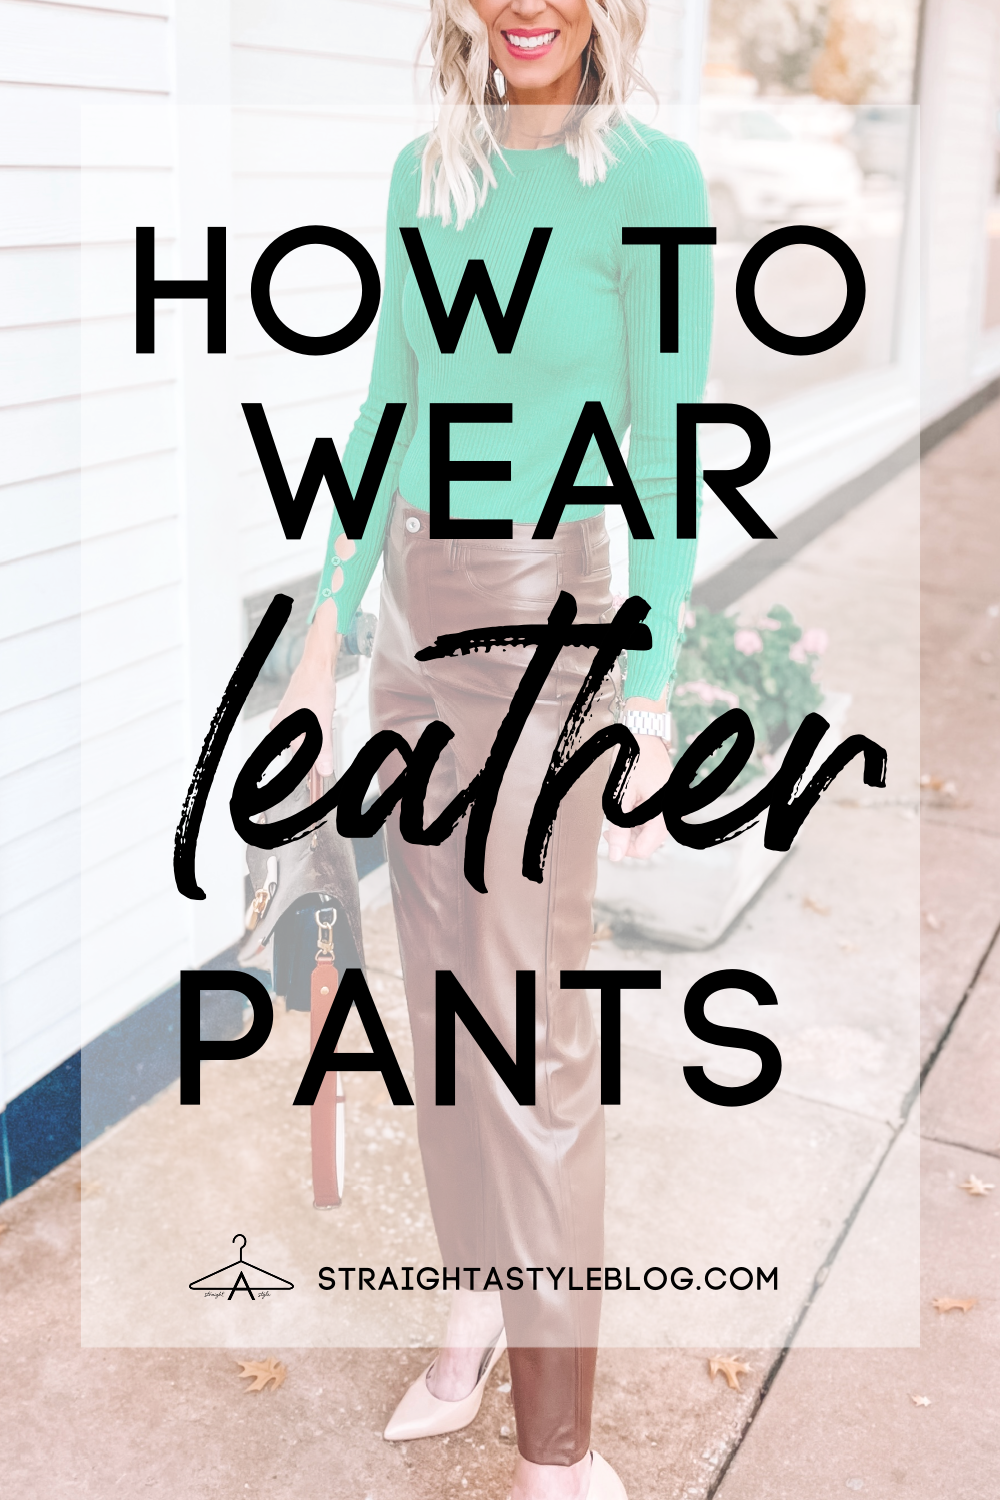 How to Wear Leather Pants - Straight A Style